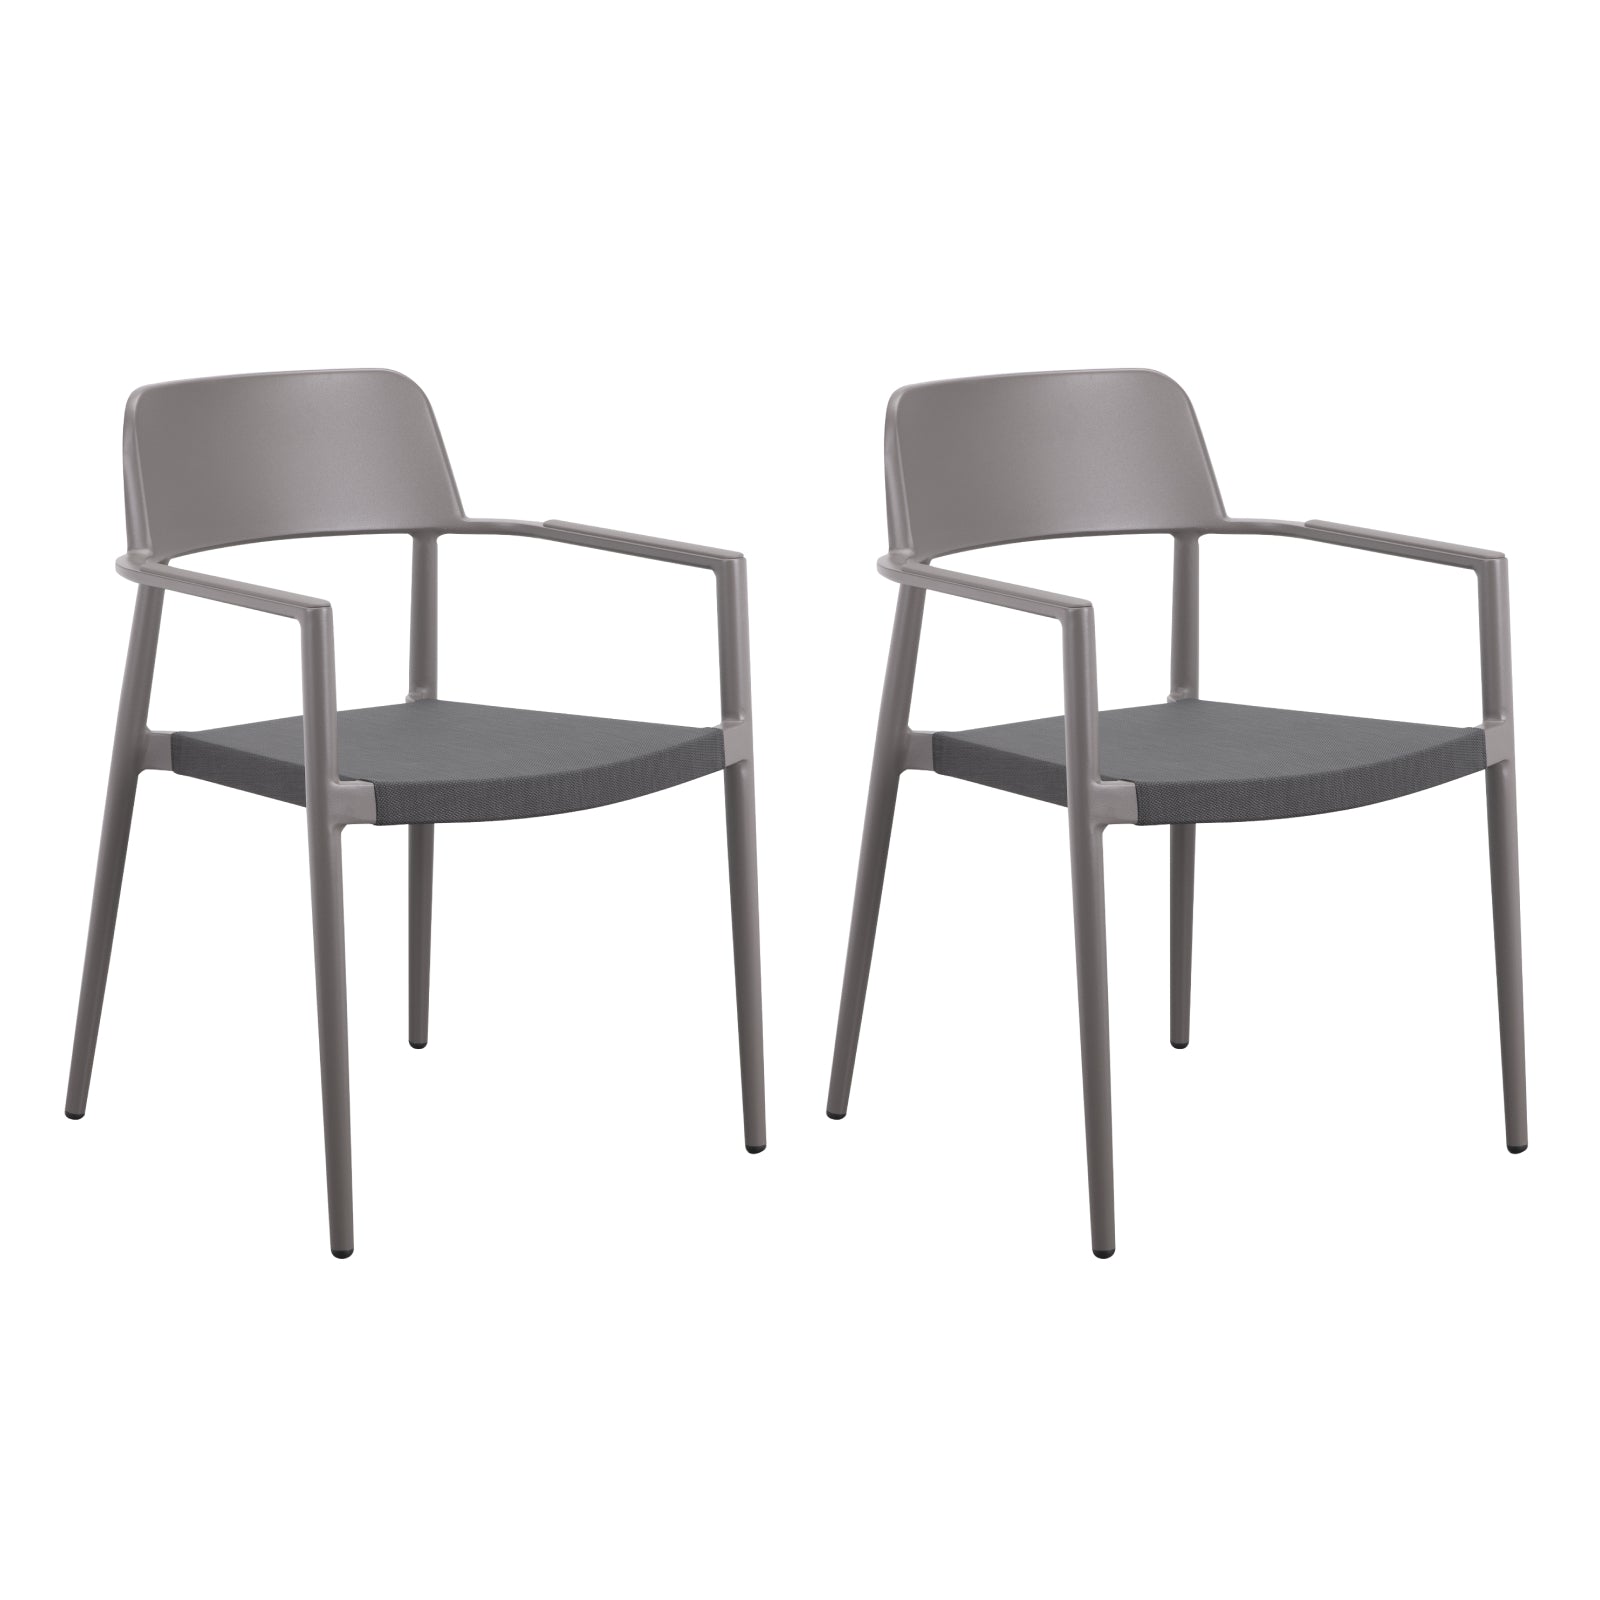 Best Of Me Outdoor Dining Chair (Set of Two), Pewter - Image 9